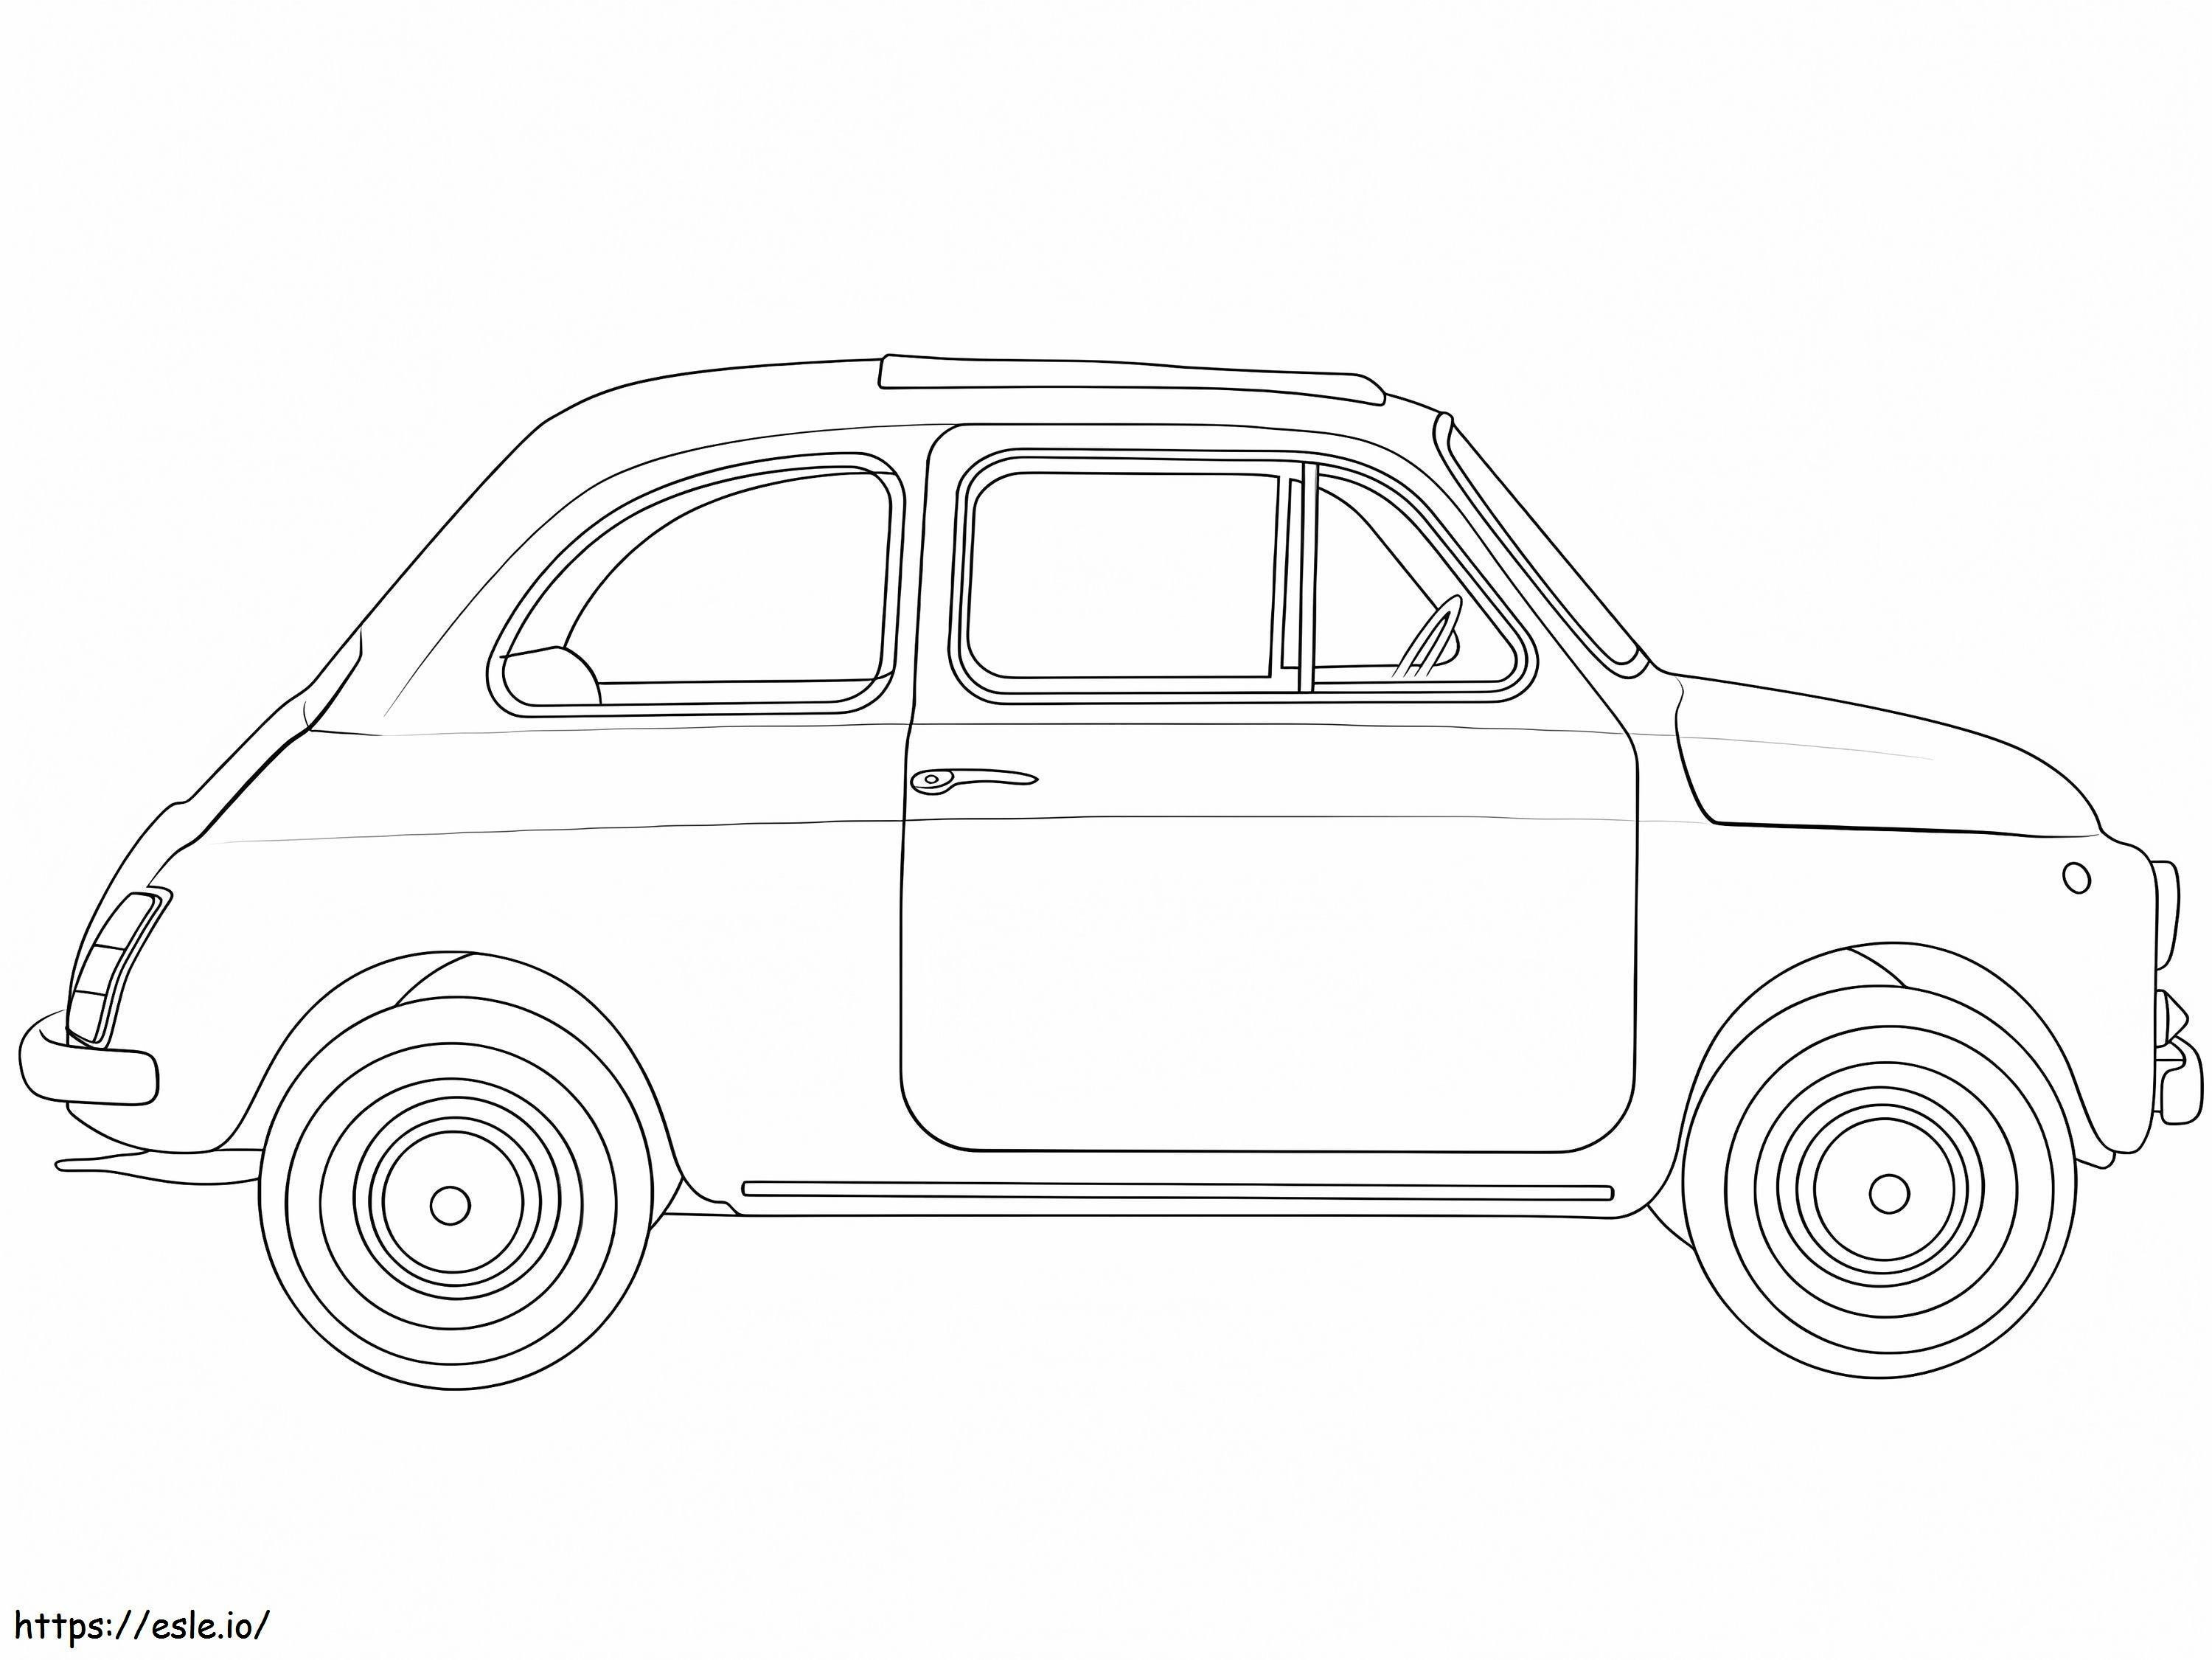 Fiat 500 coloring page